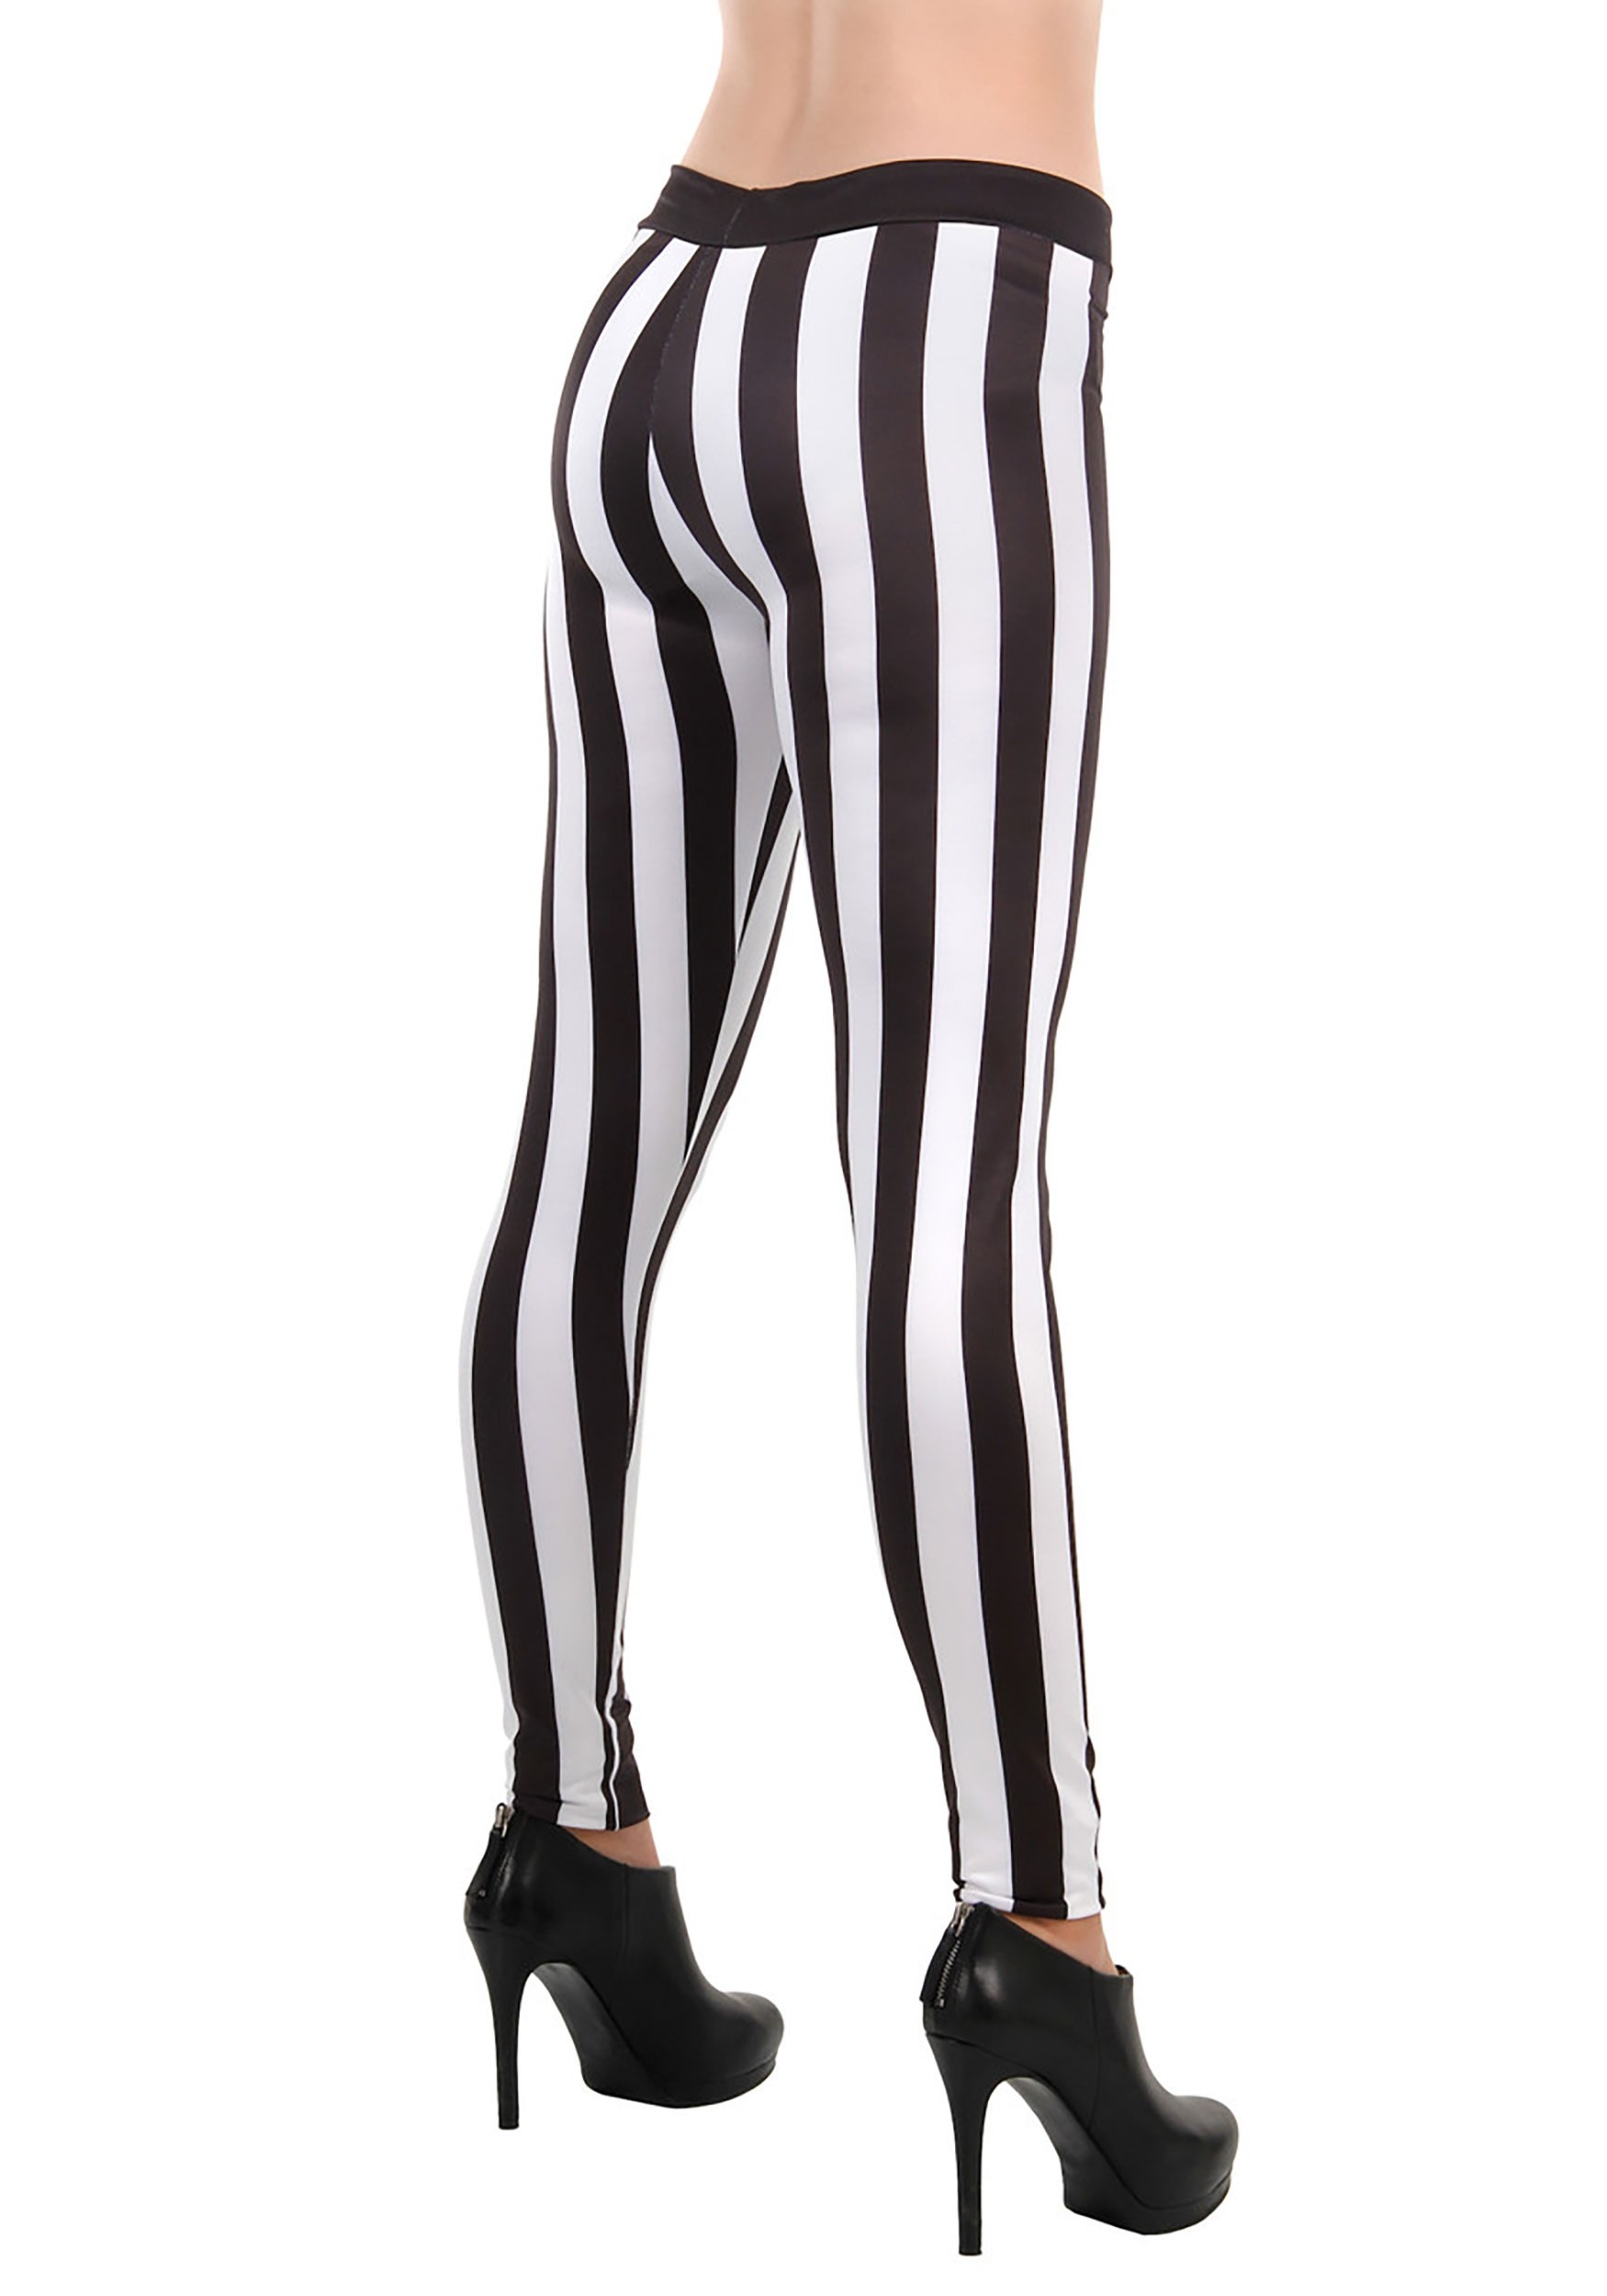 https://images.halloweencostumes.com/products/69235/2-1-159342/striped-leggings-one-size-alt-2.jpg